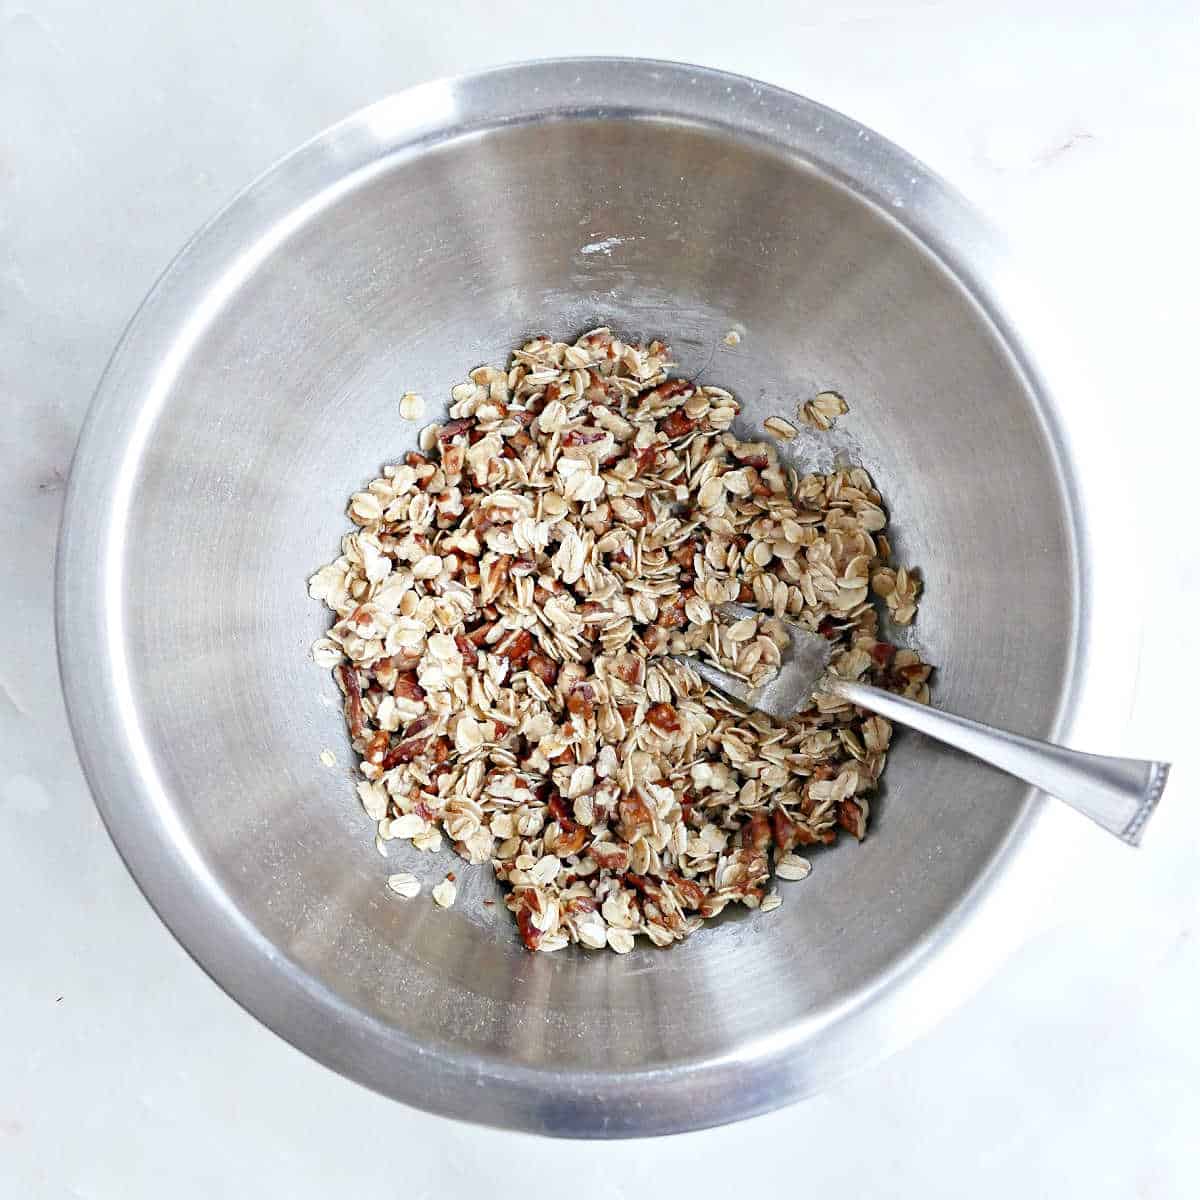 chopped pecans, oats, flour, and coconut oil mixed together in a bowl